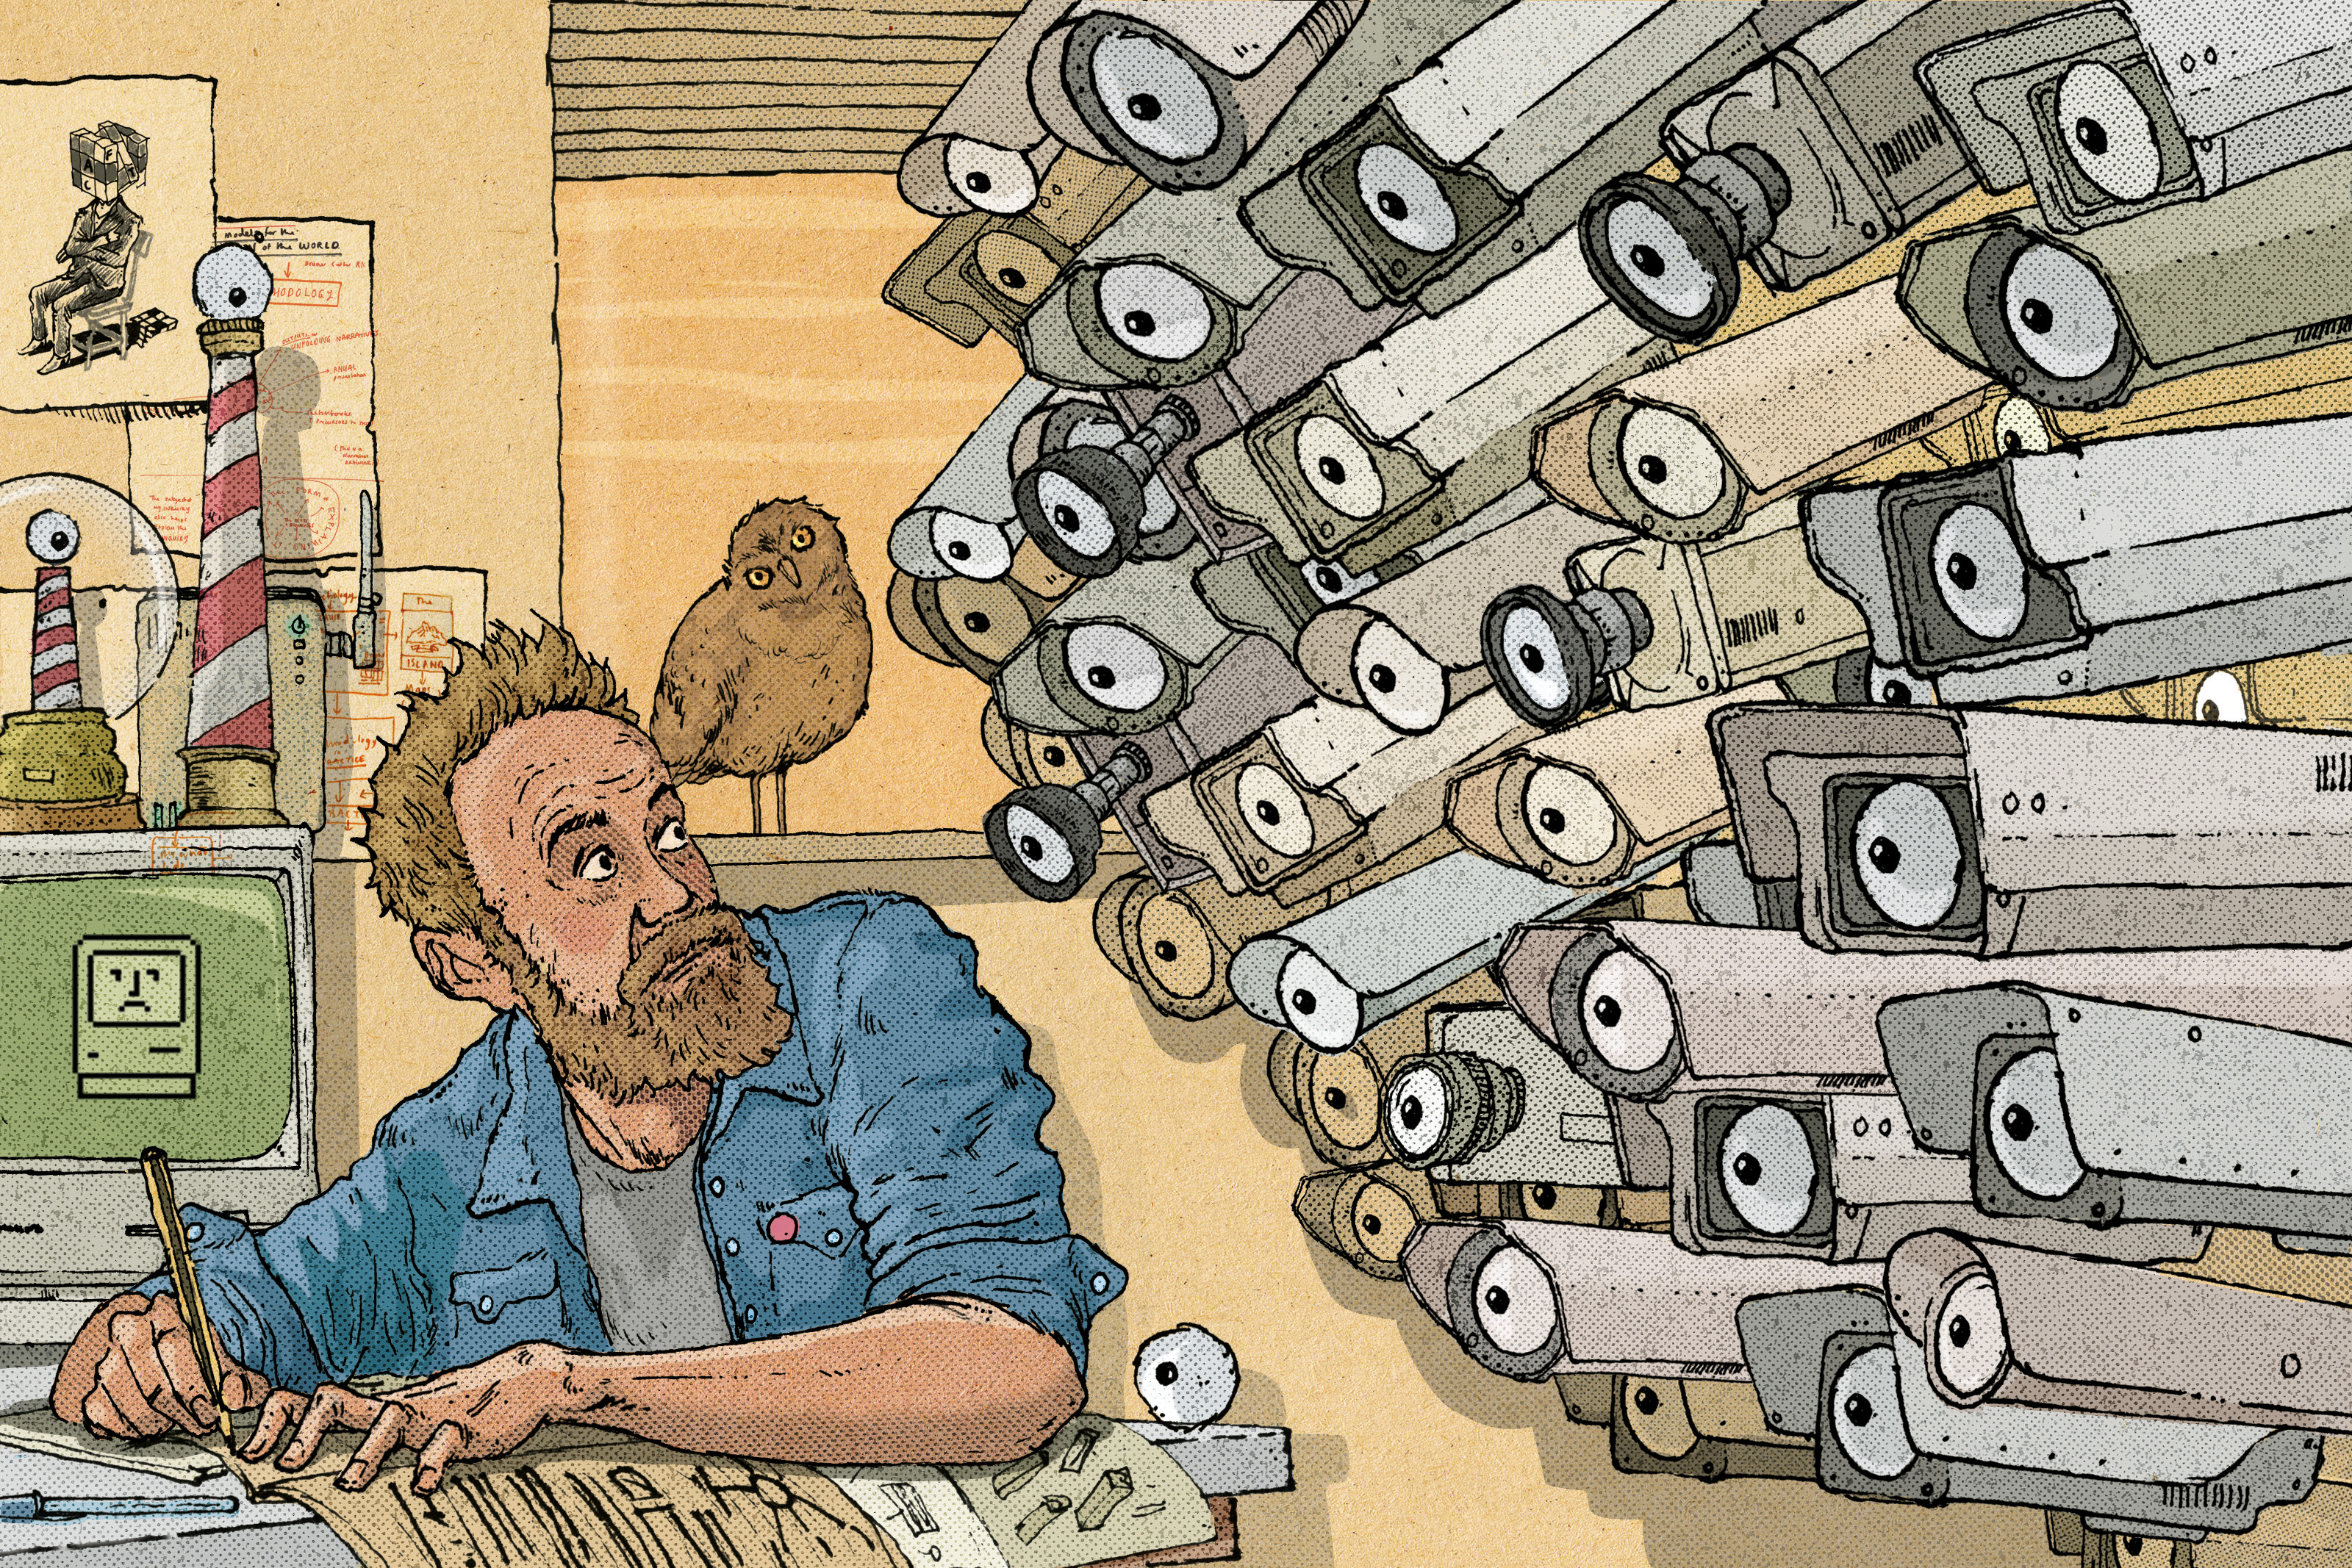 Illustration of PhD student writing at his desk, surrounded by surveillance cameras. Illustration by Paul Jackson, LCC.